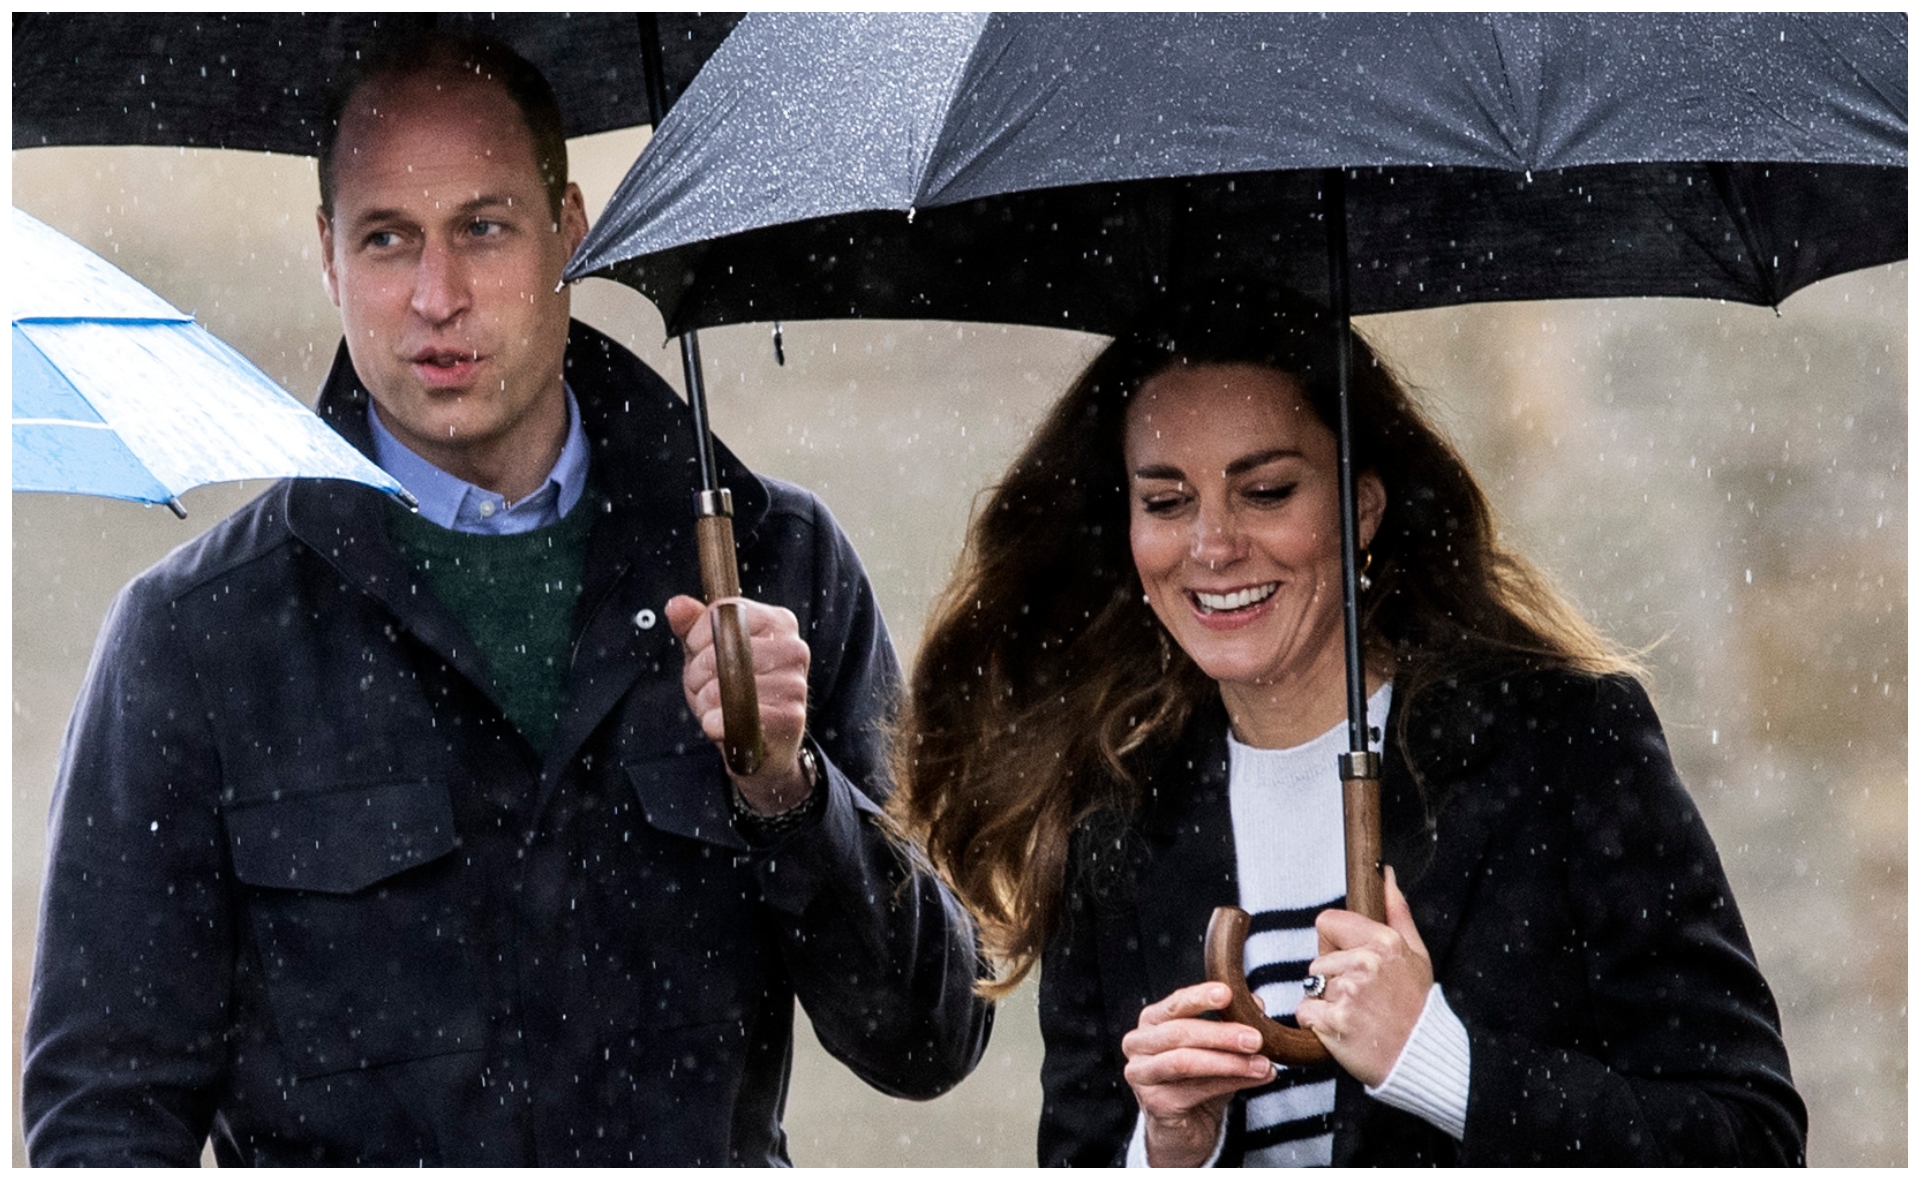 Duchess Catherine and Prince William spotted during a secret date night as they visit the place the first fell in love